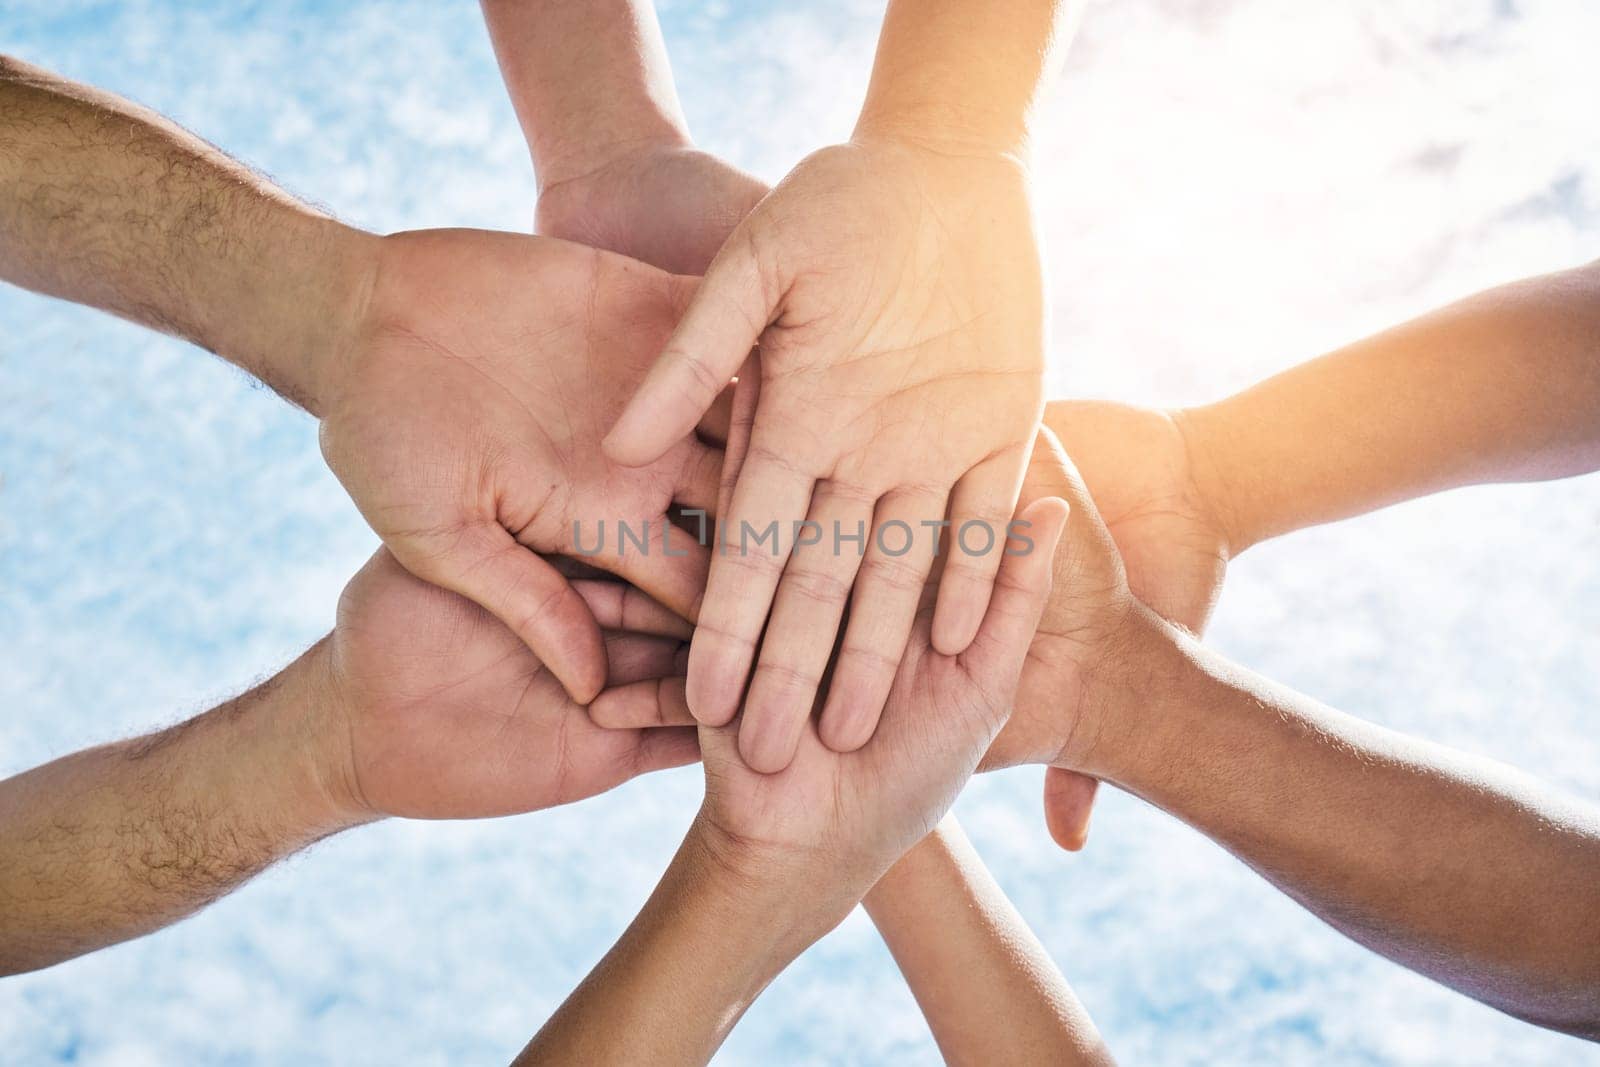 Hands in circle together, blue sky and community in collaboration for world support, trust and diversity. Teamwork, hand and summer sunshine, positive mindset and group of people in solidarity huddle.